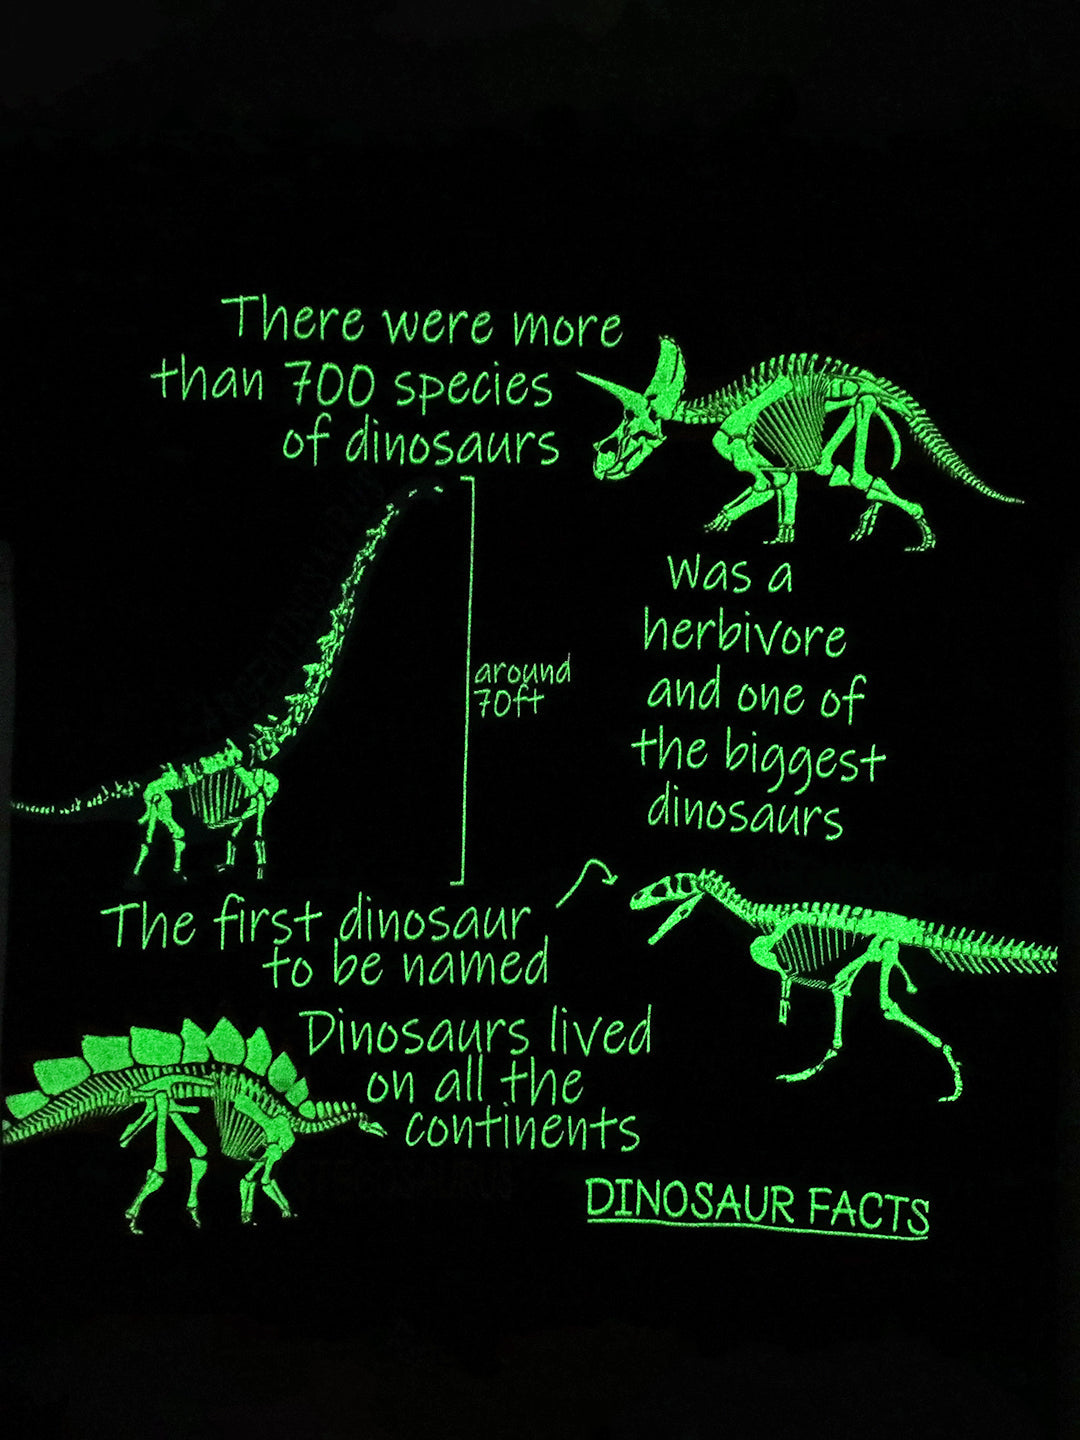 DINO FACTS